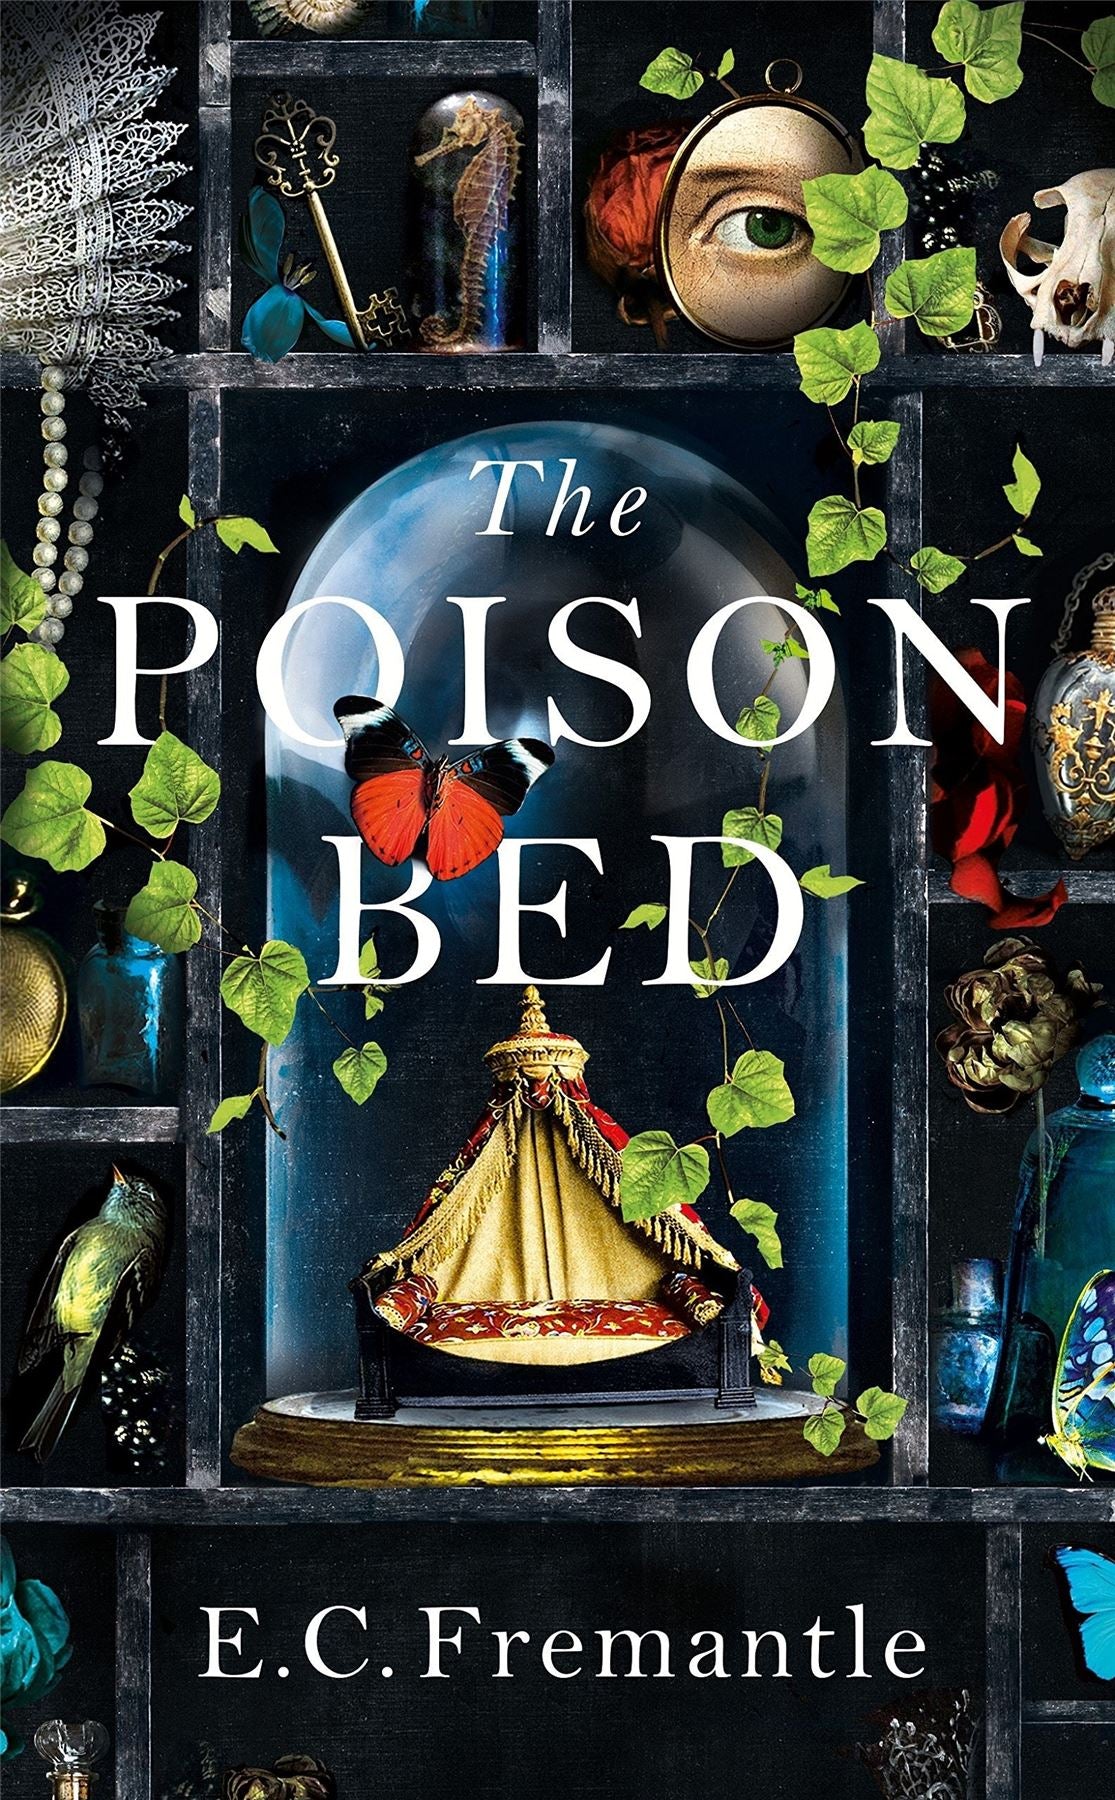 The Poison Bed - Signed, Lined & Dated